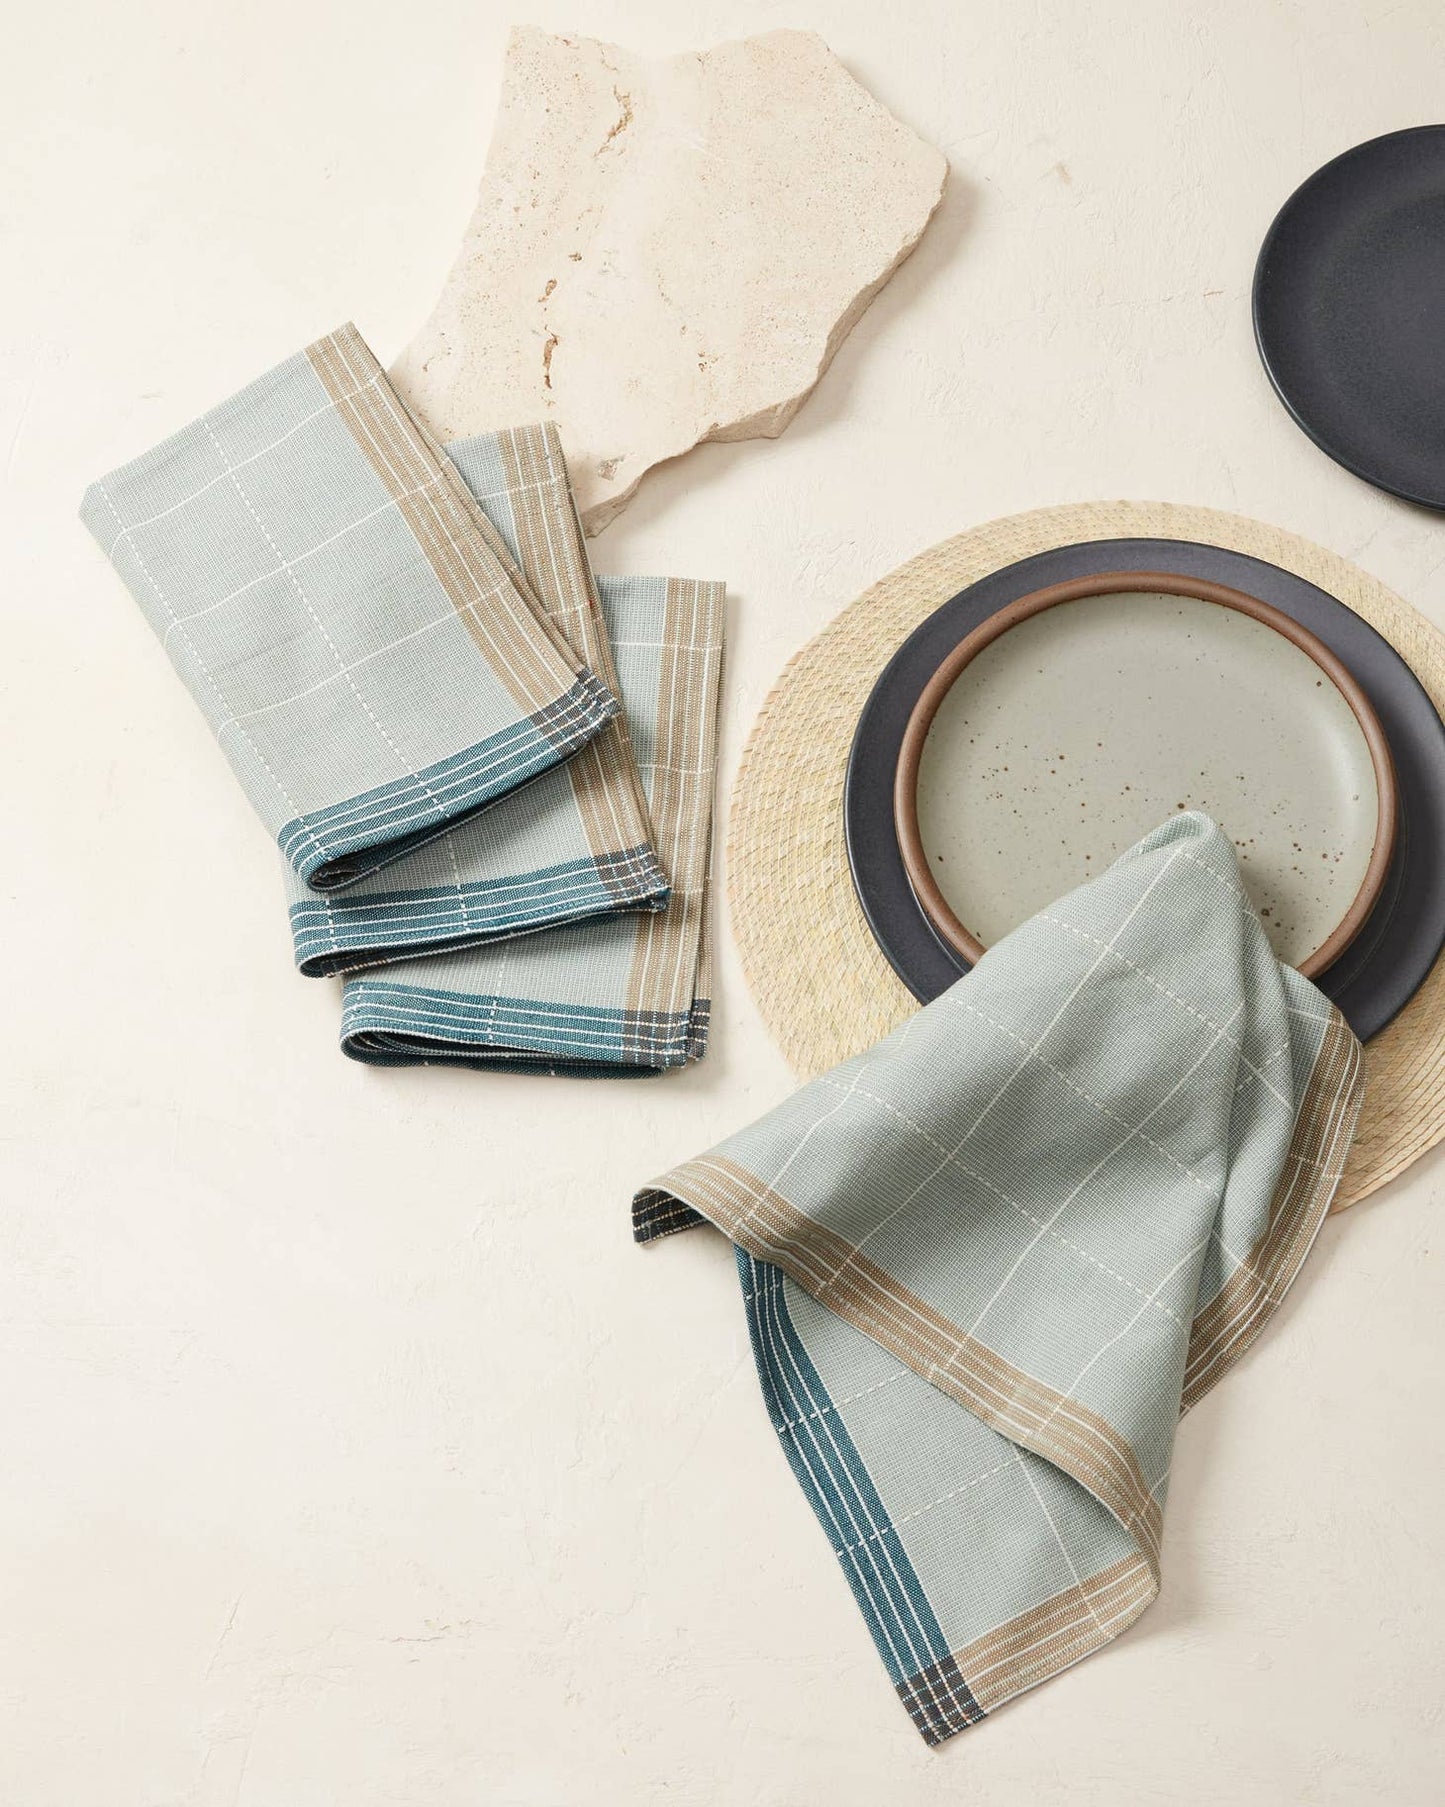 Inspired by gridlines on a map and the color of birds, handwoven 100% cotton napkins feature a rust and dove window pane plaid with striped edging. Add a pop of color for everyday dining, or layer for special occasions. Handwoven in Chiapas, Mexico.